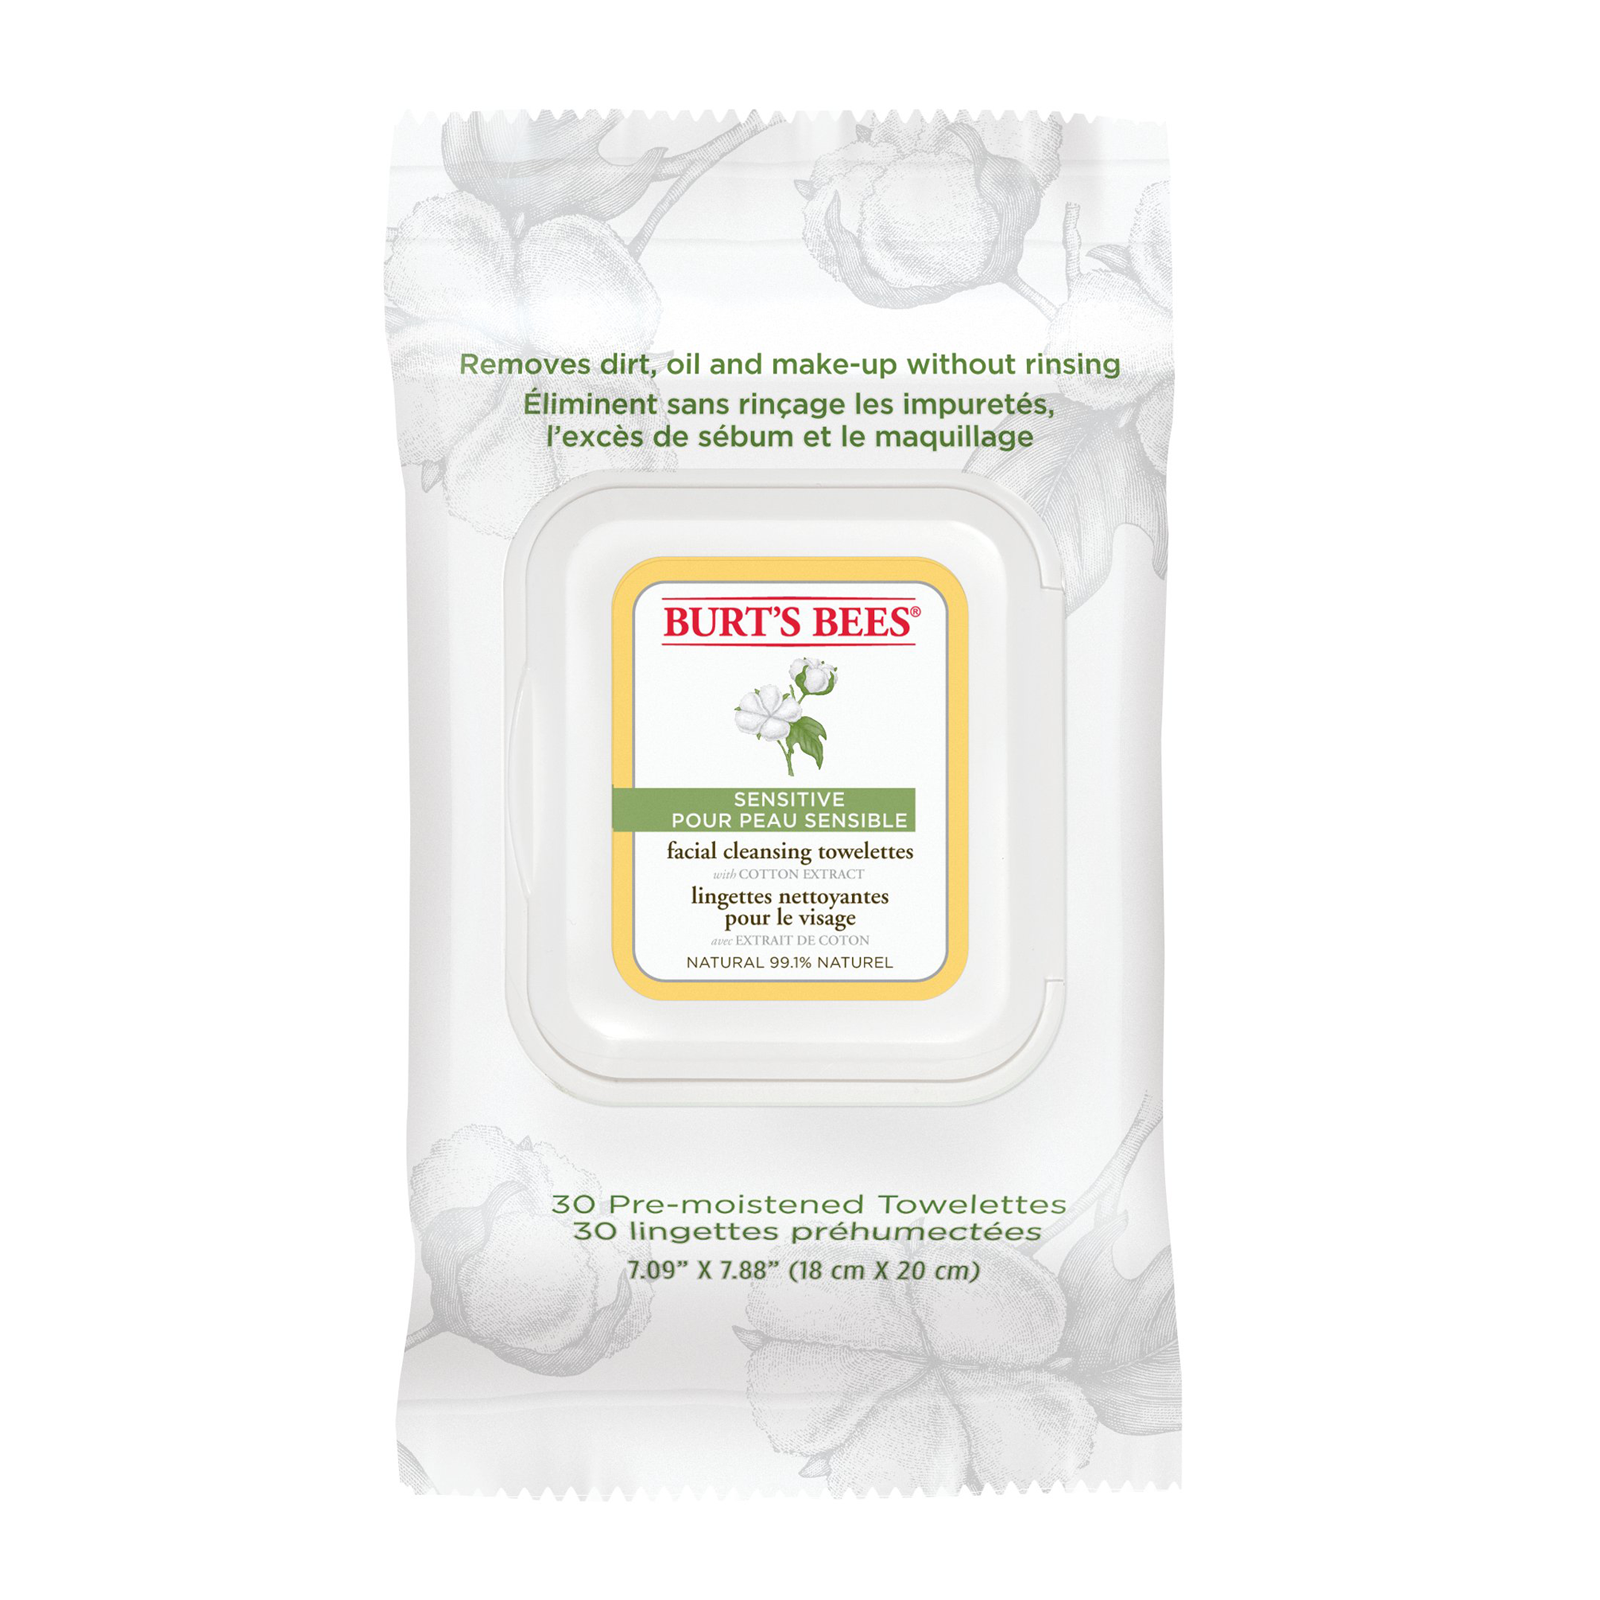 Burt's Bees Sensitive Facial Cleansing Towelettes with Cotton Extract on Belle Belle Beauty